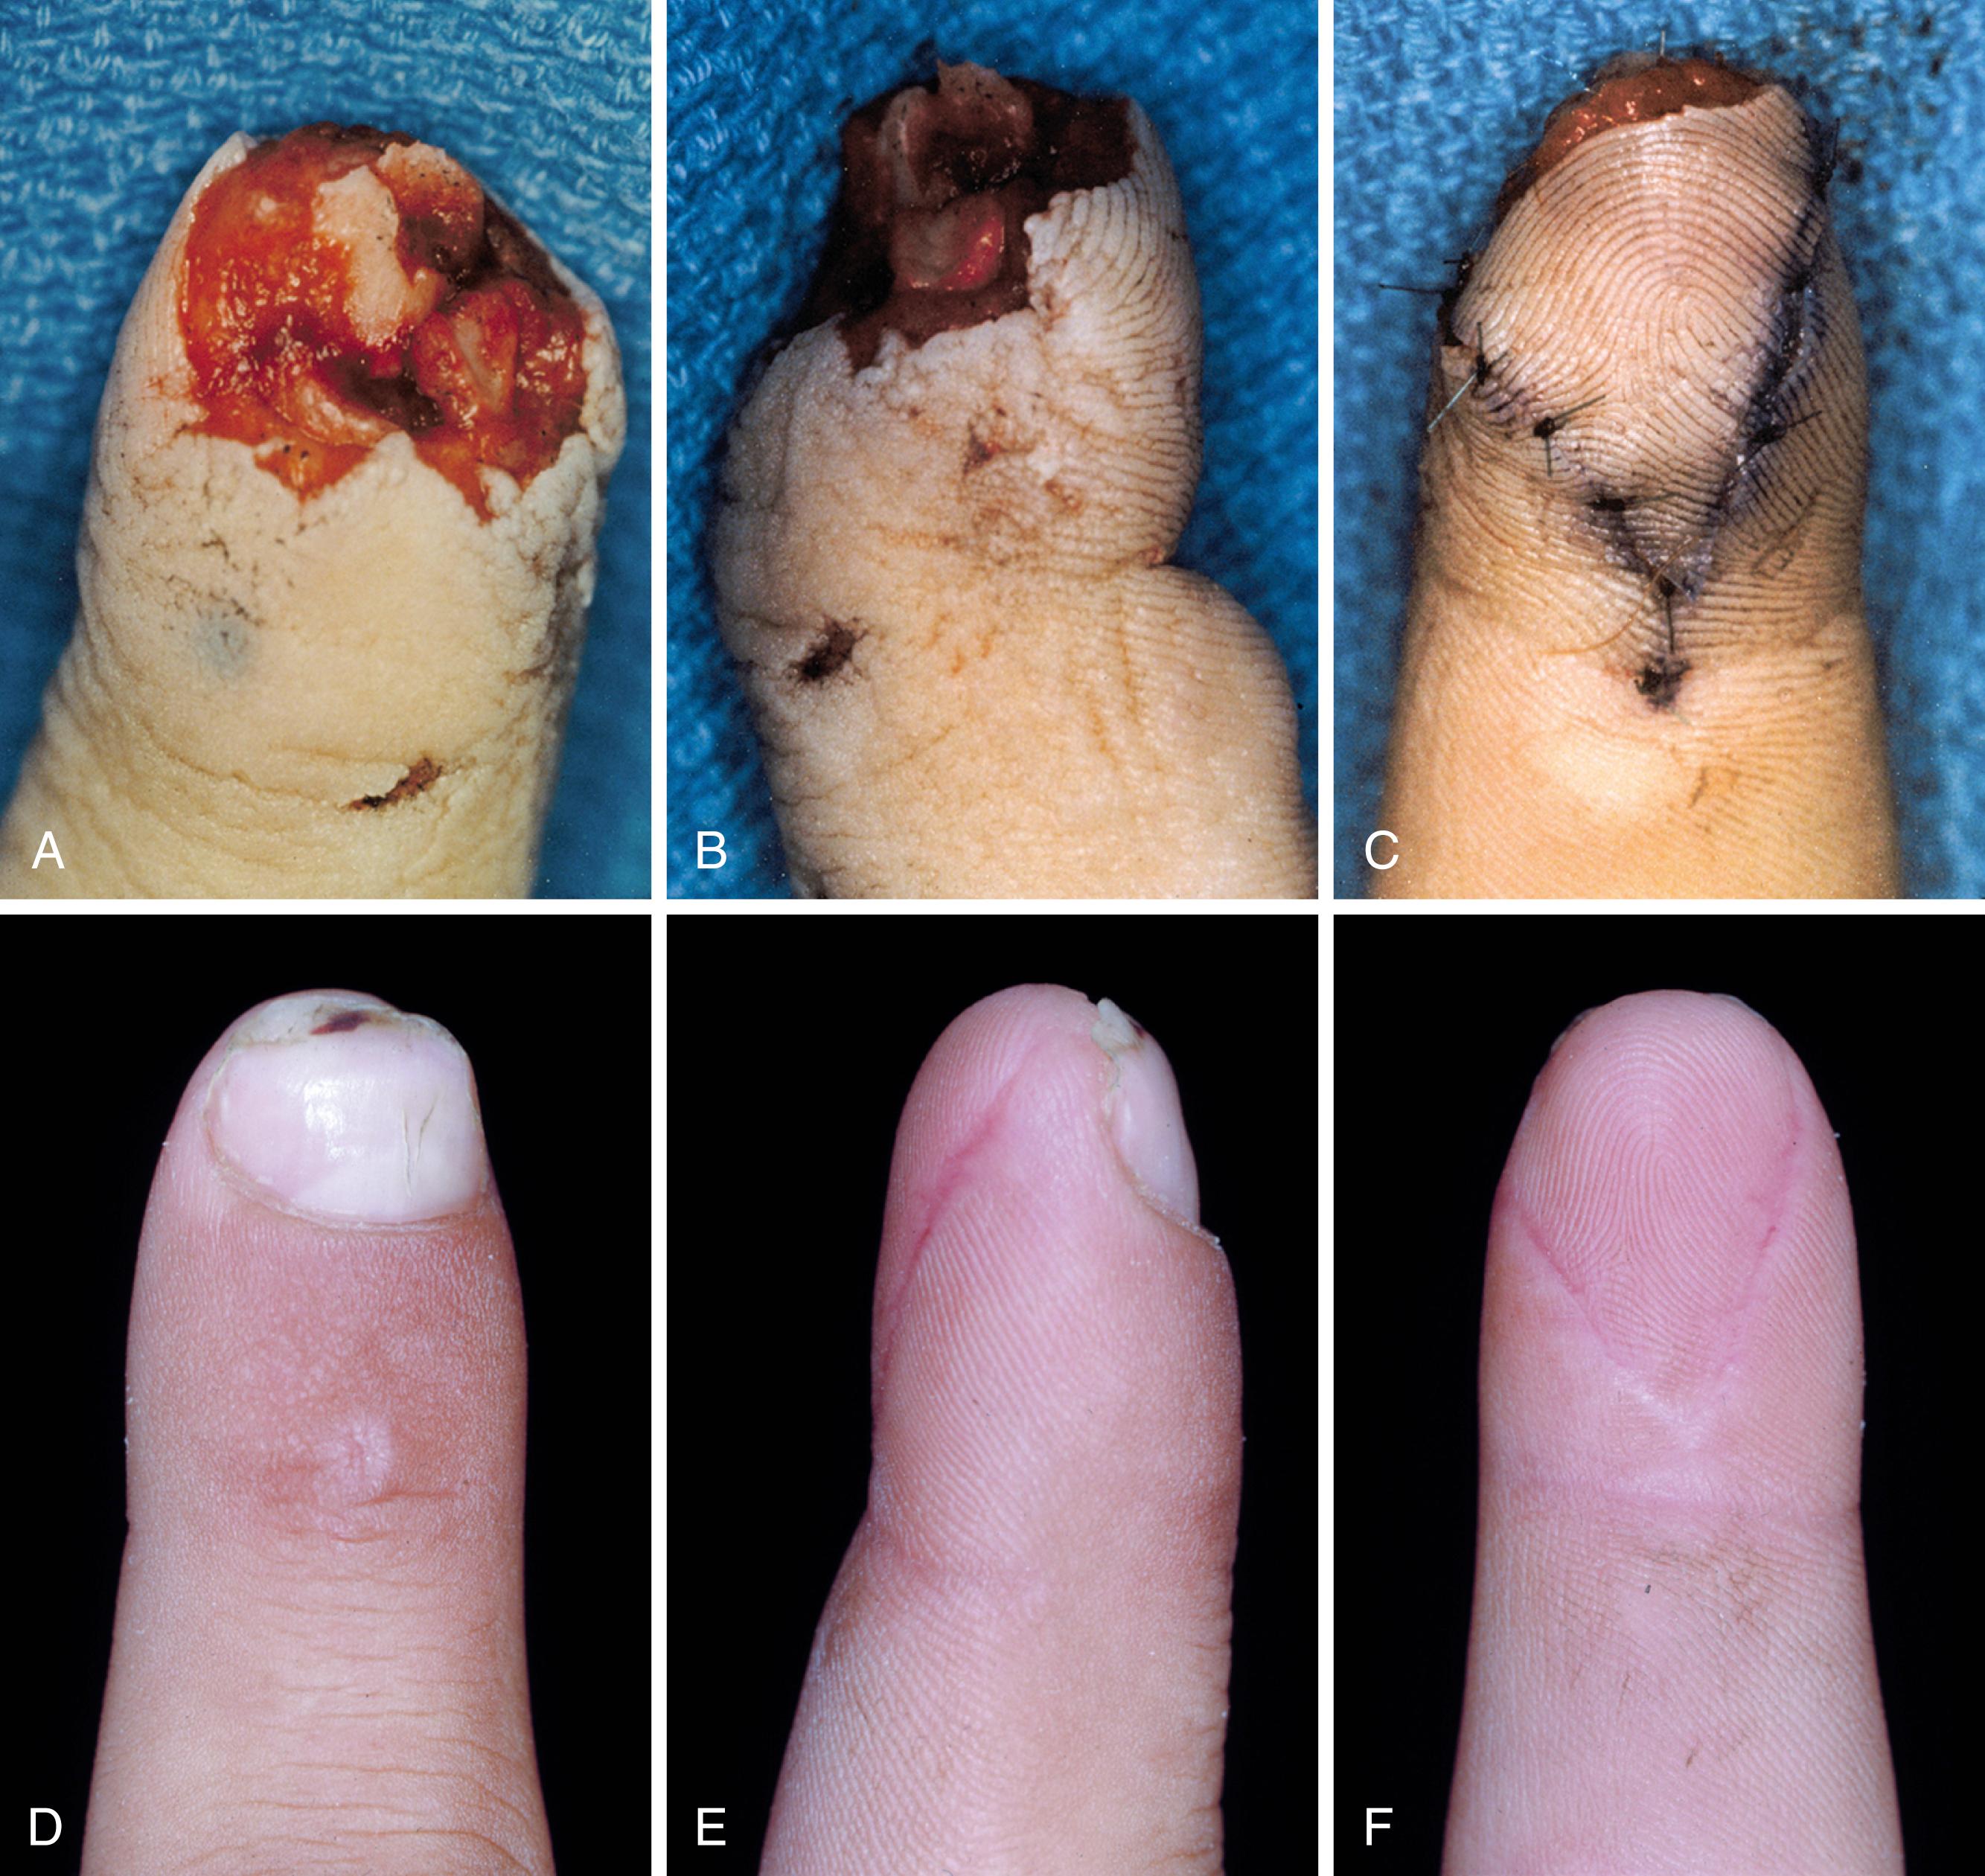 Fig. 9.12, A, Fingertip injury with avulsion of nail bed. B, Dorsal tip defect with intact volar skin. C, “V-Y” volar advancement flap for coverage and nail bed support. D to F, Results after partial nail regrowth.